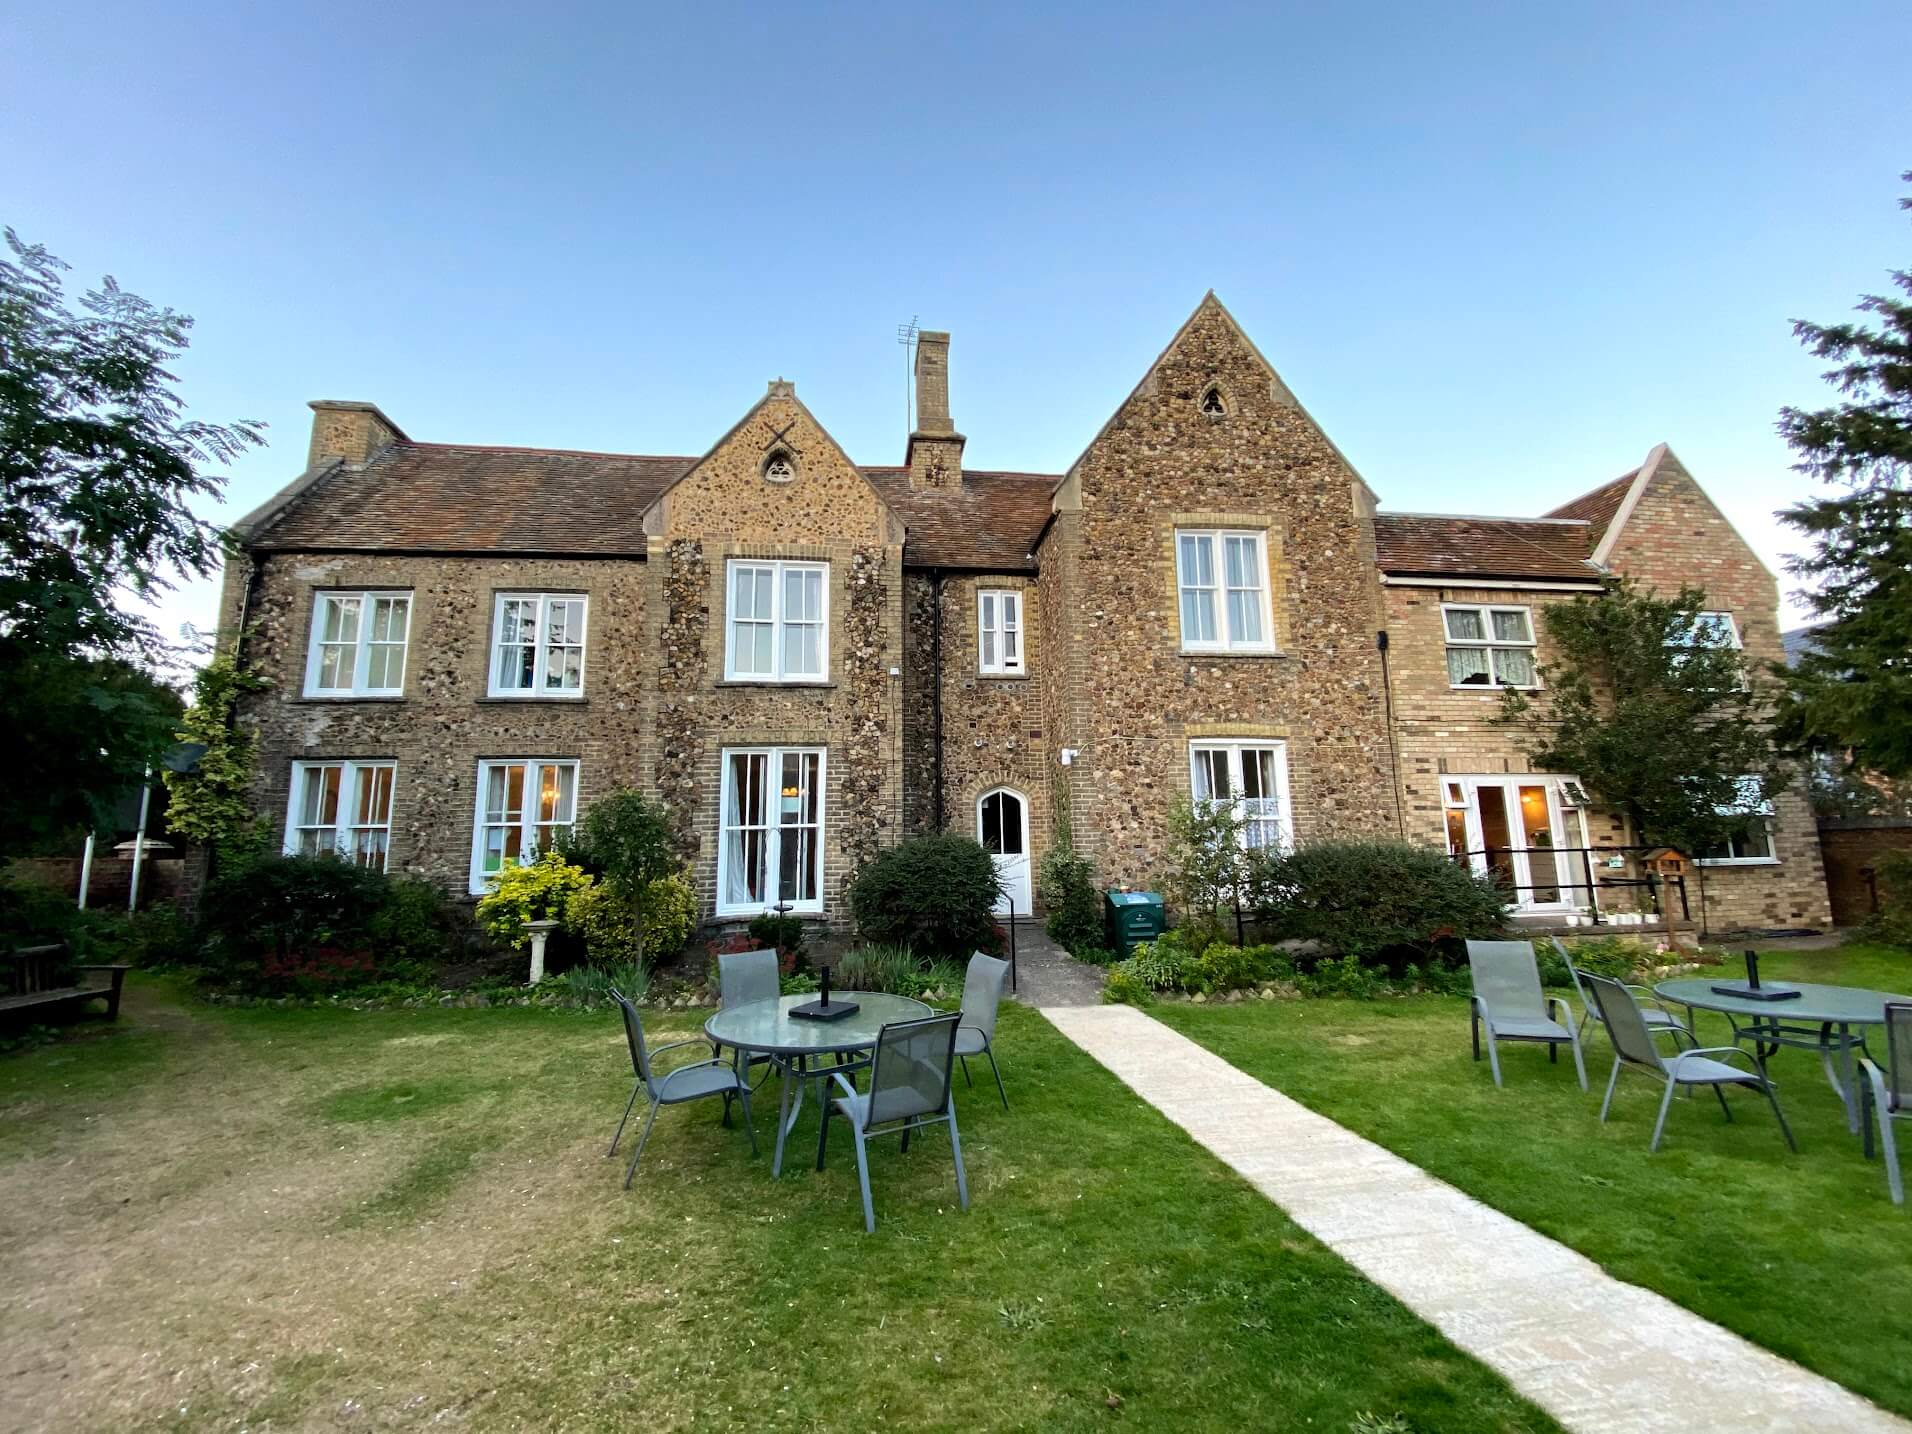 Windows refurbishment in Care home – Old Vicarage Care Home, St Neots